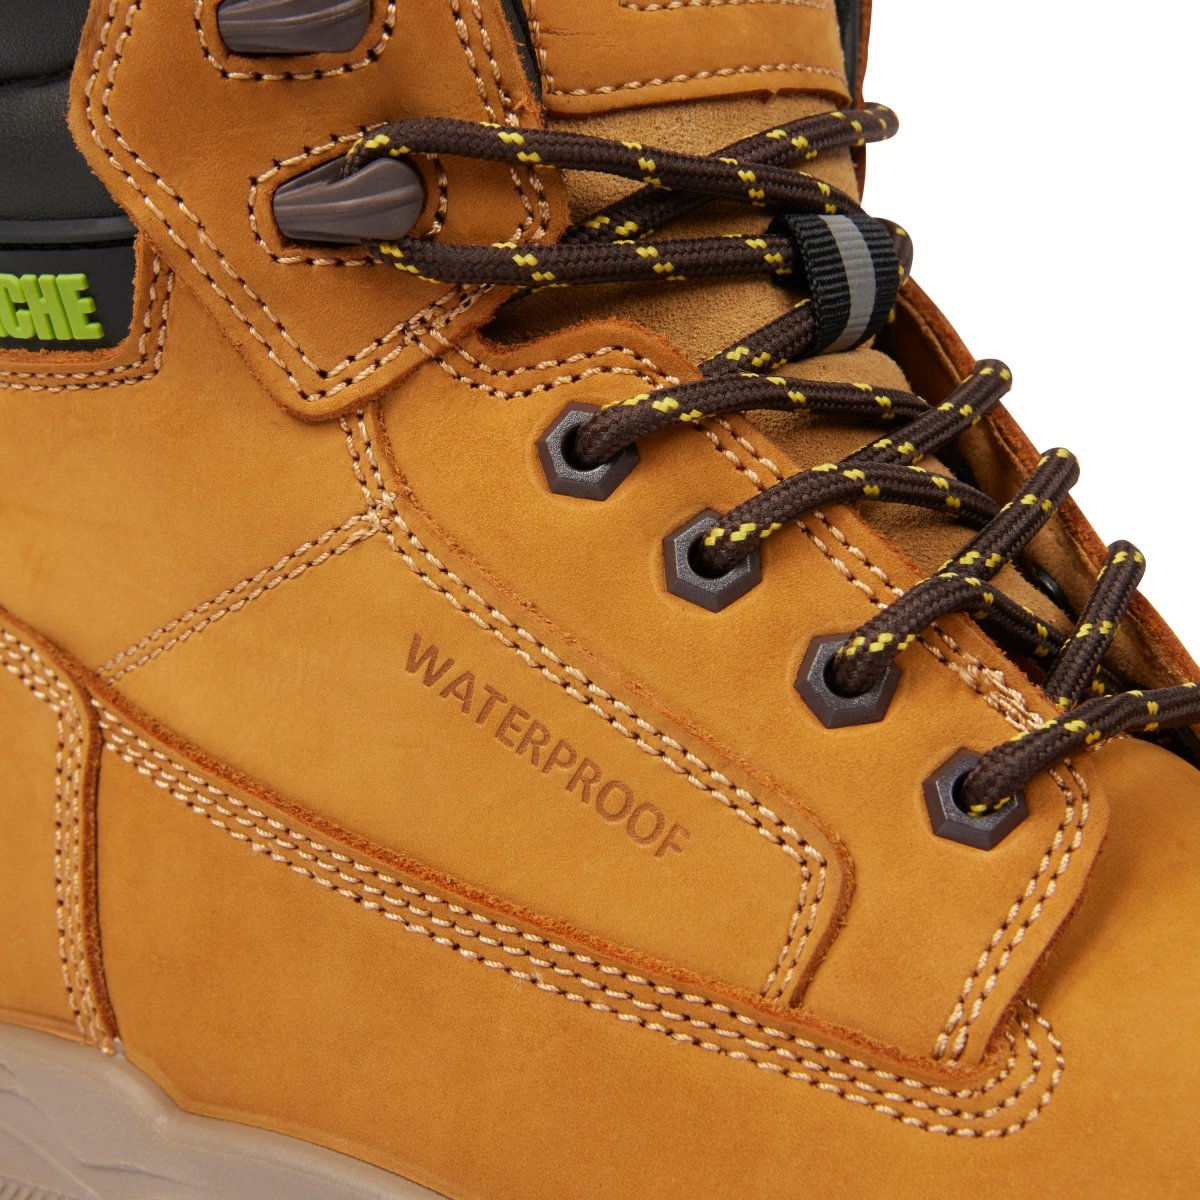 Apache Thompson Waterproof Safety Boot - Shoe Store Direct